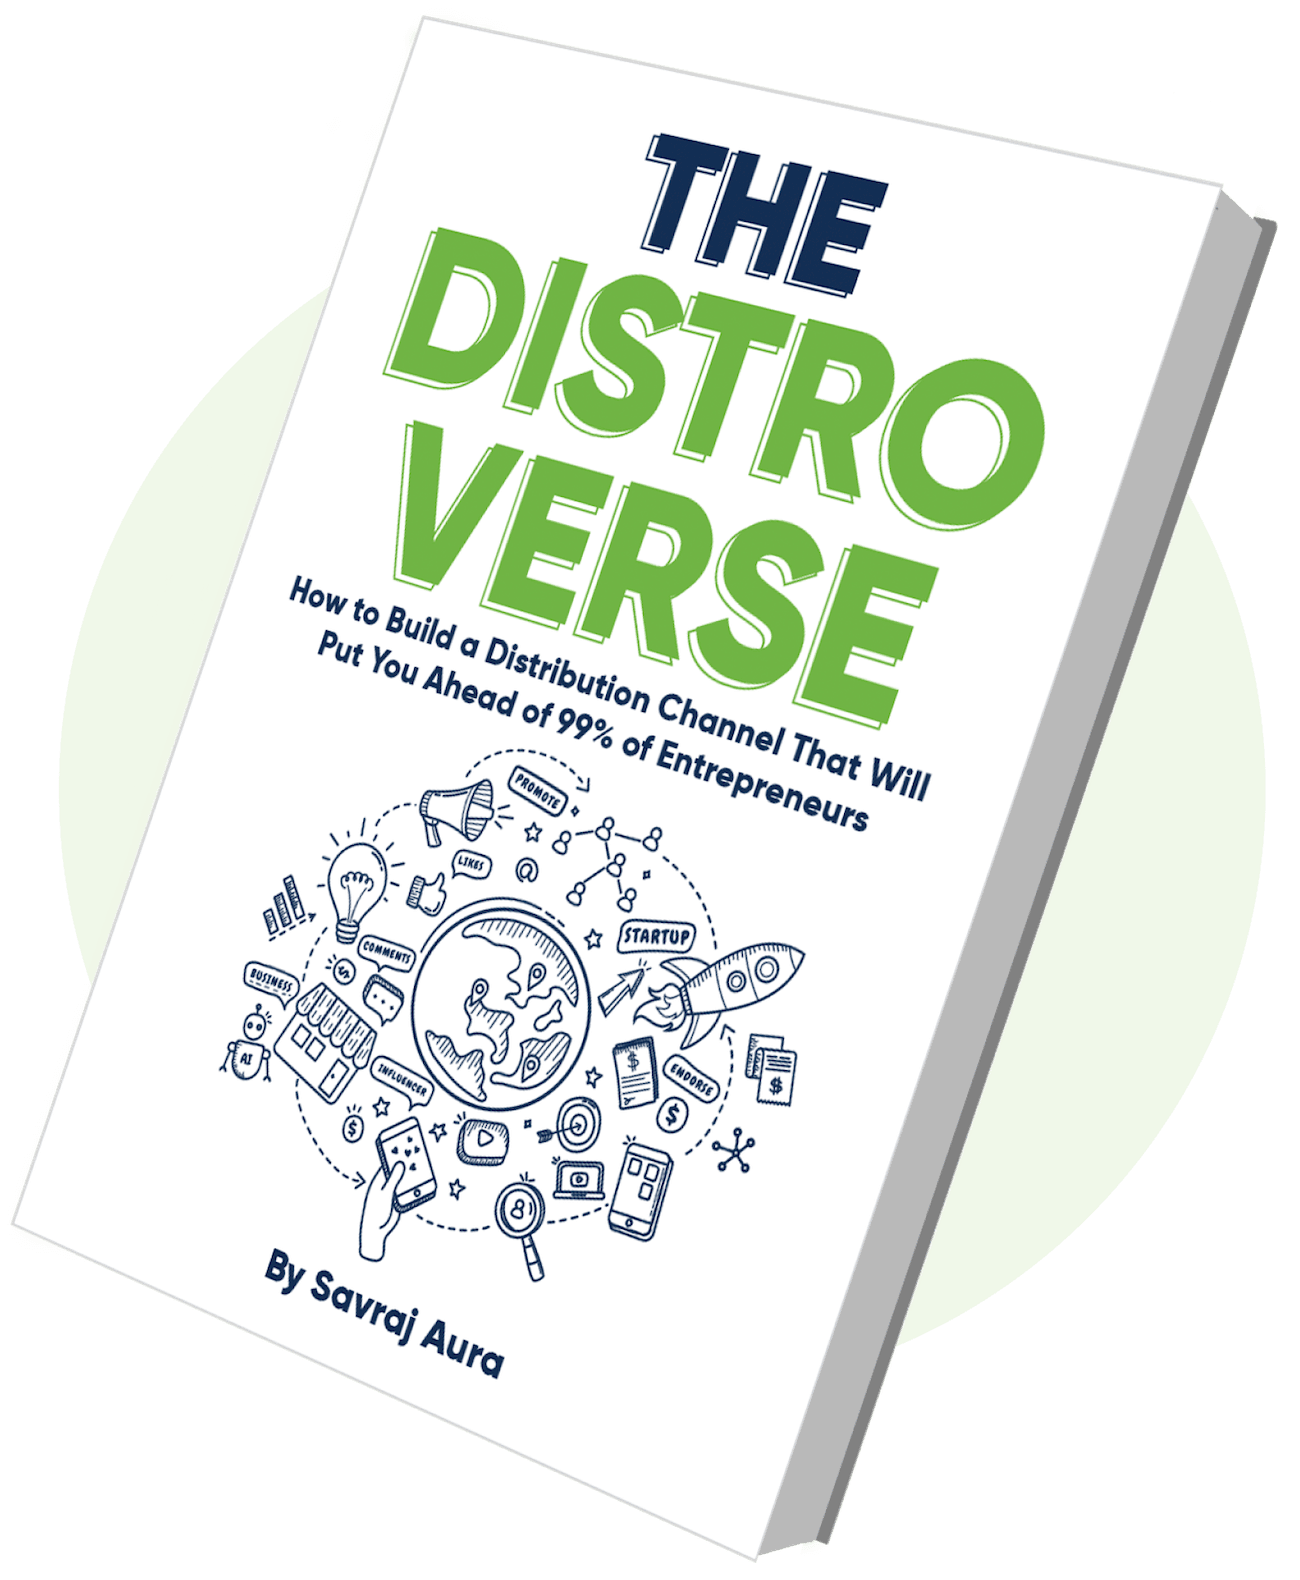 The DistroVerse Book, How to Build a Distribution Channel That Will Put You Ahead of 99% of Entrepreneurs